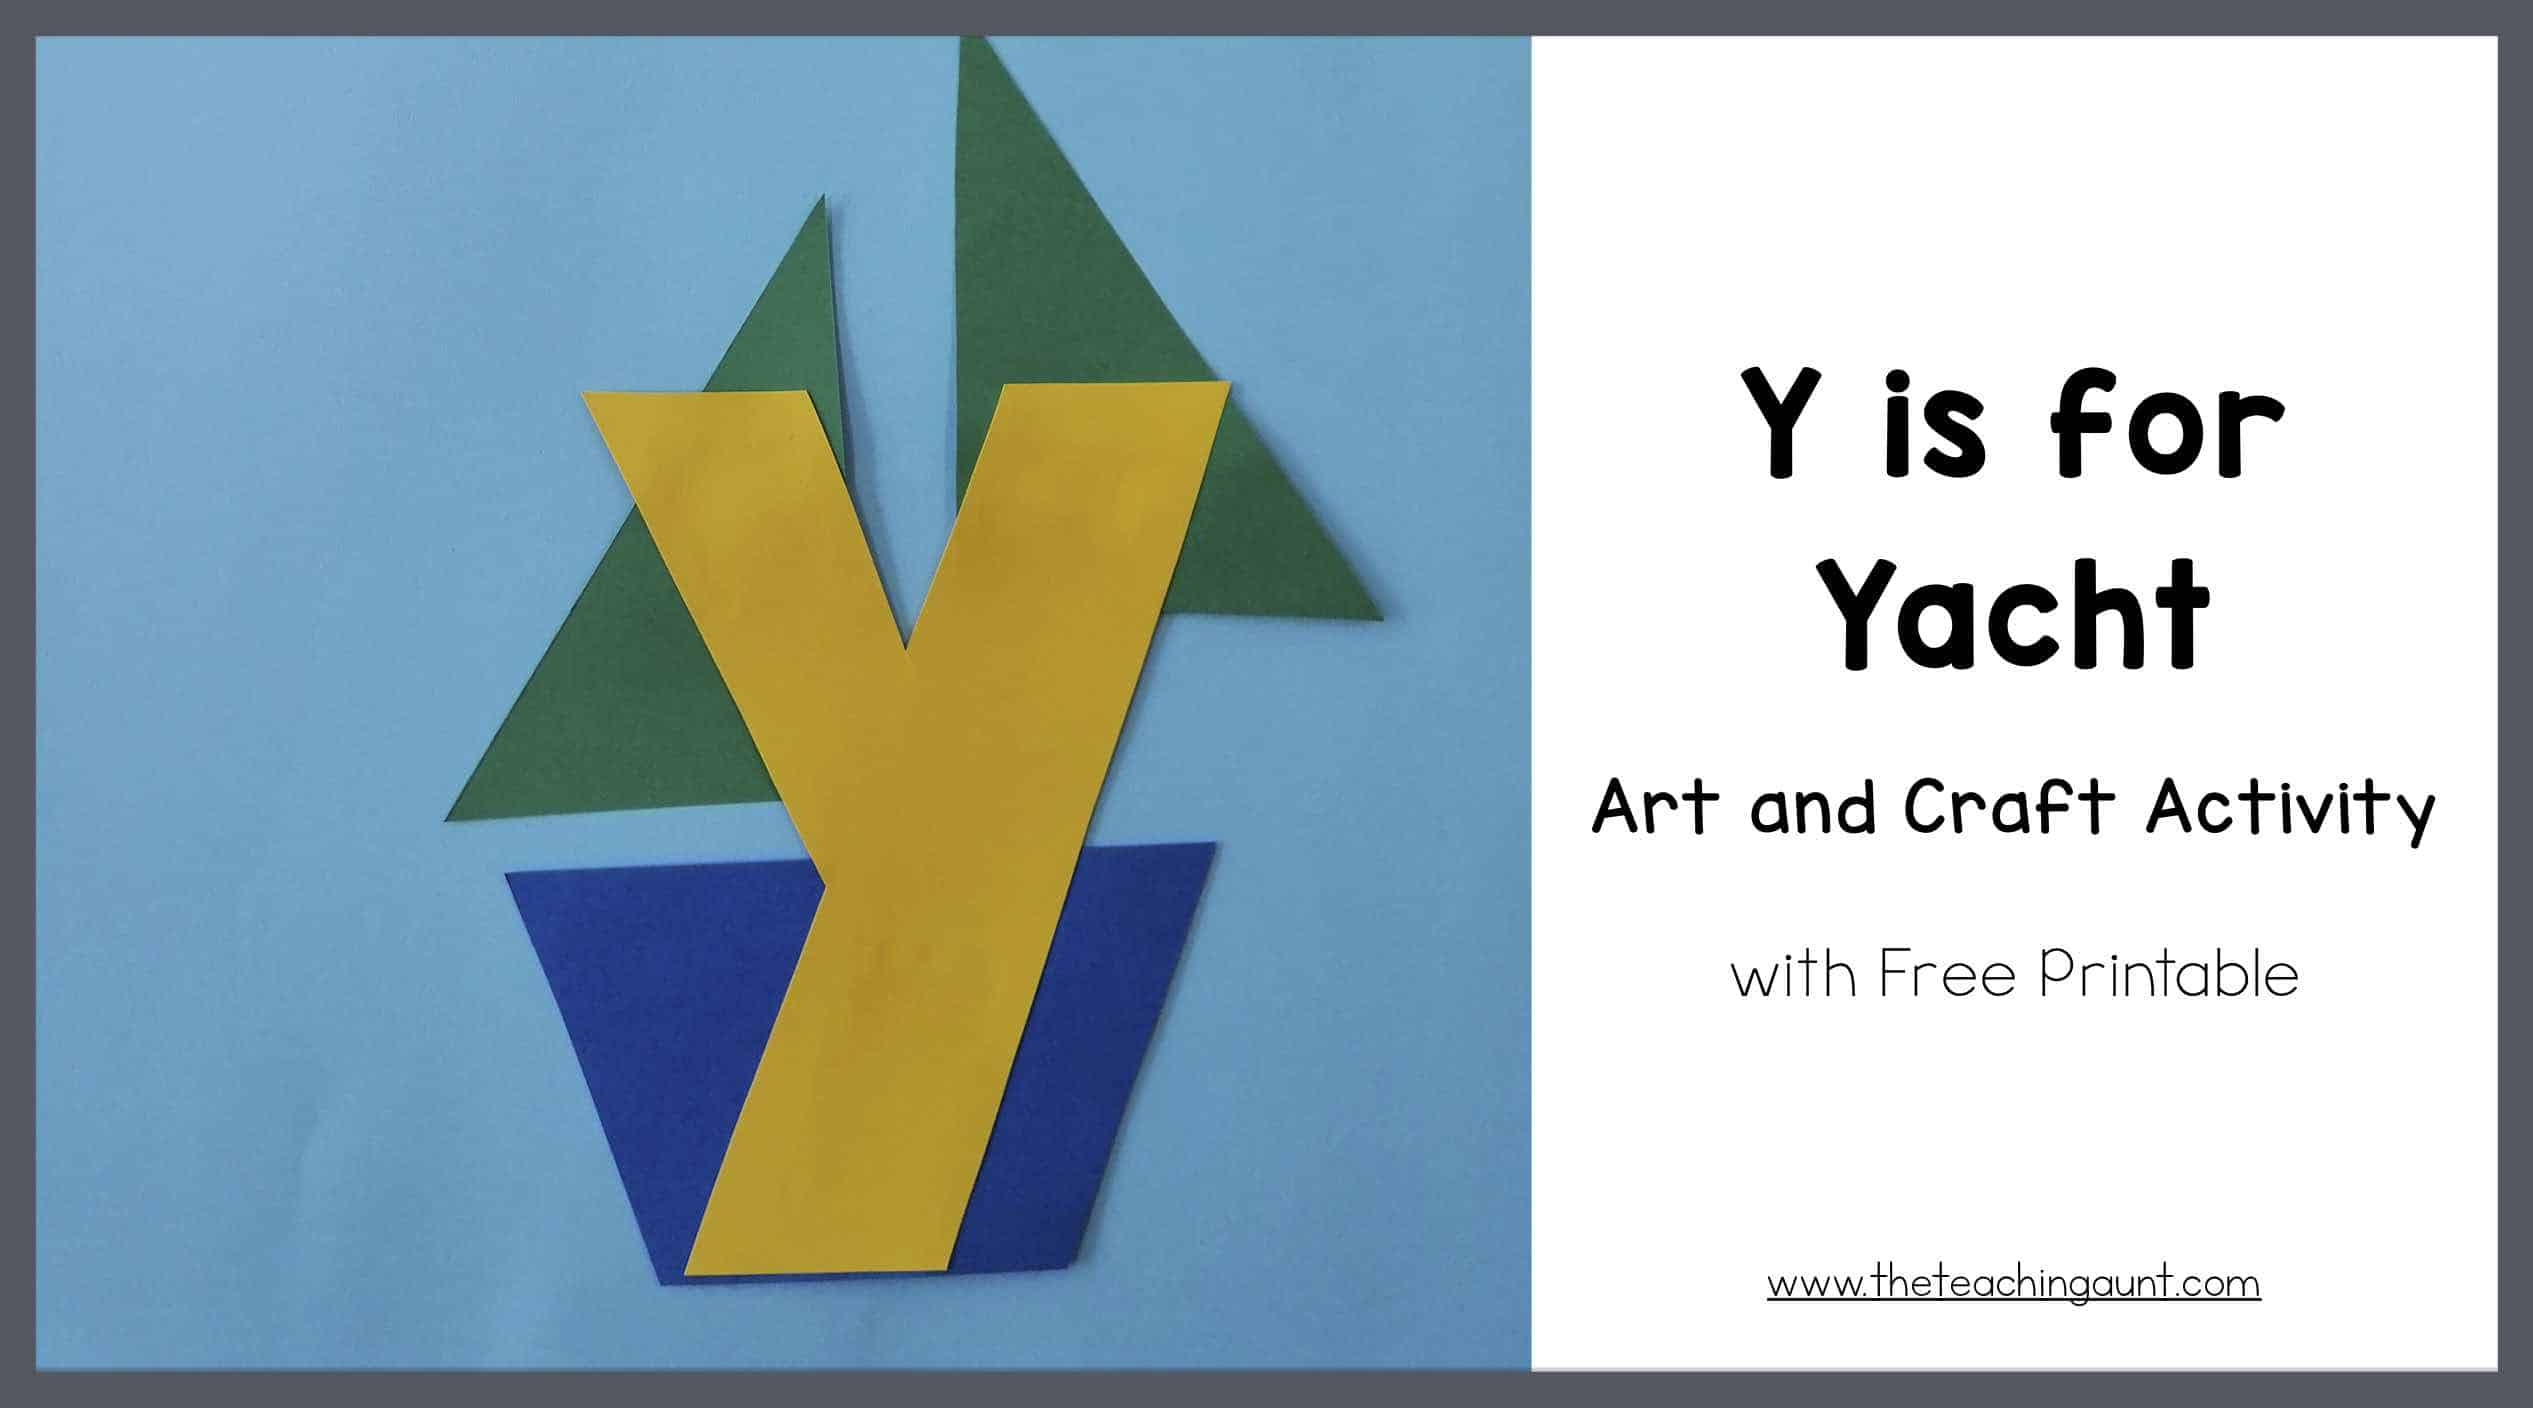 Y is for Yacht Art and Craft